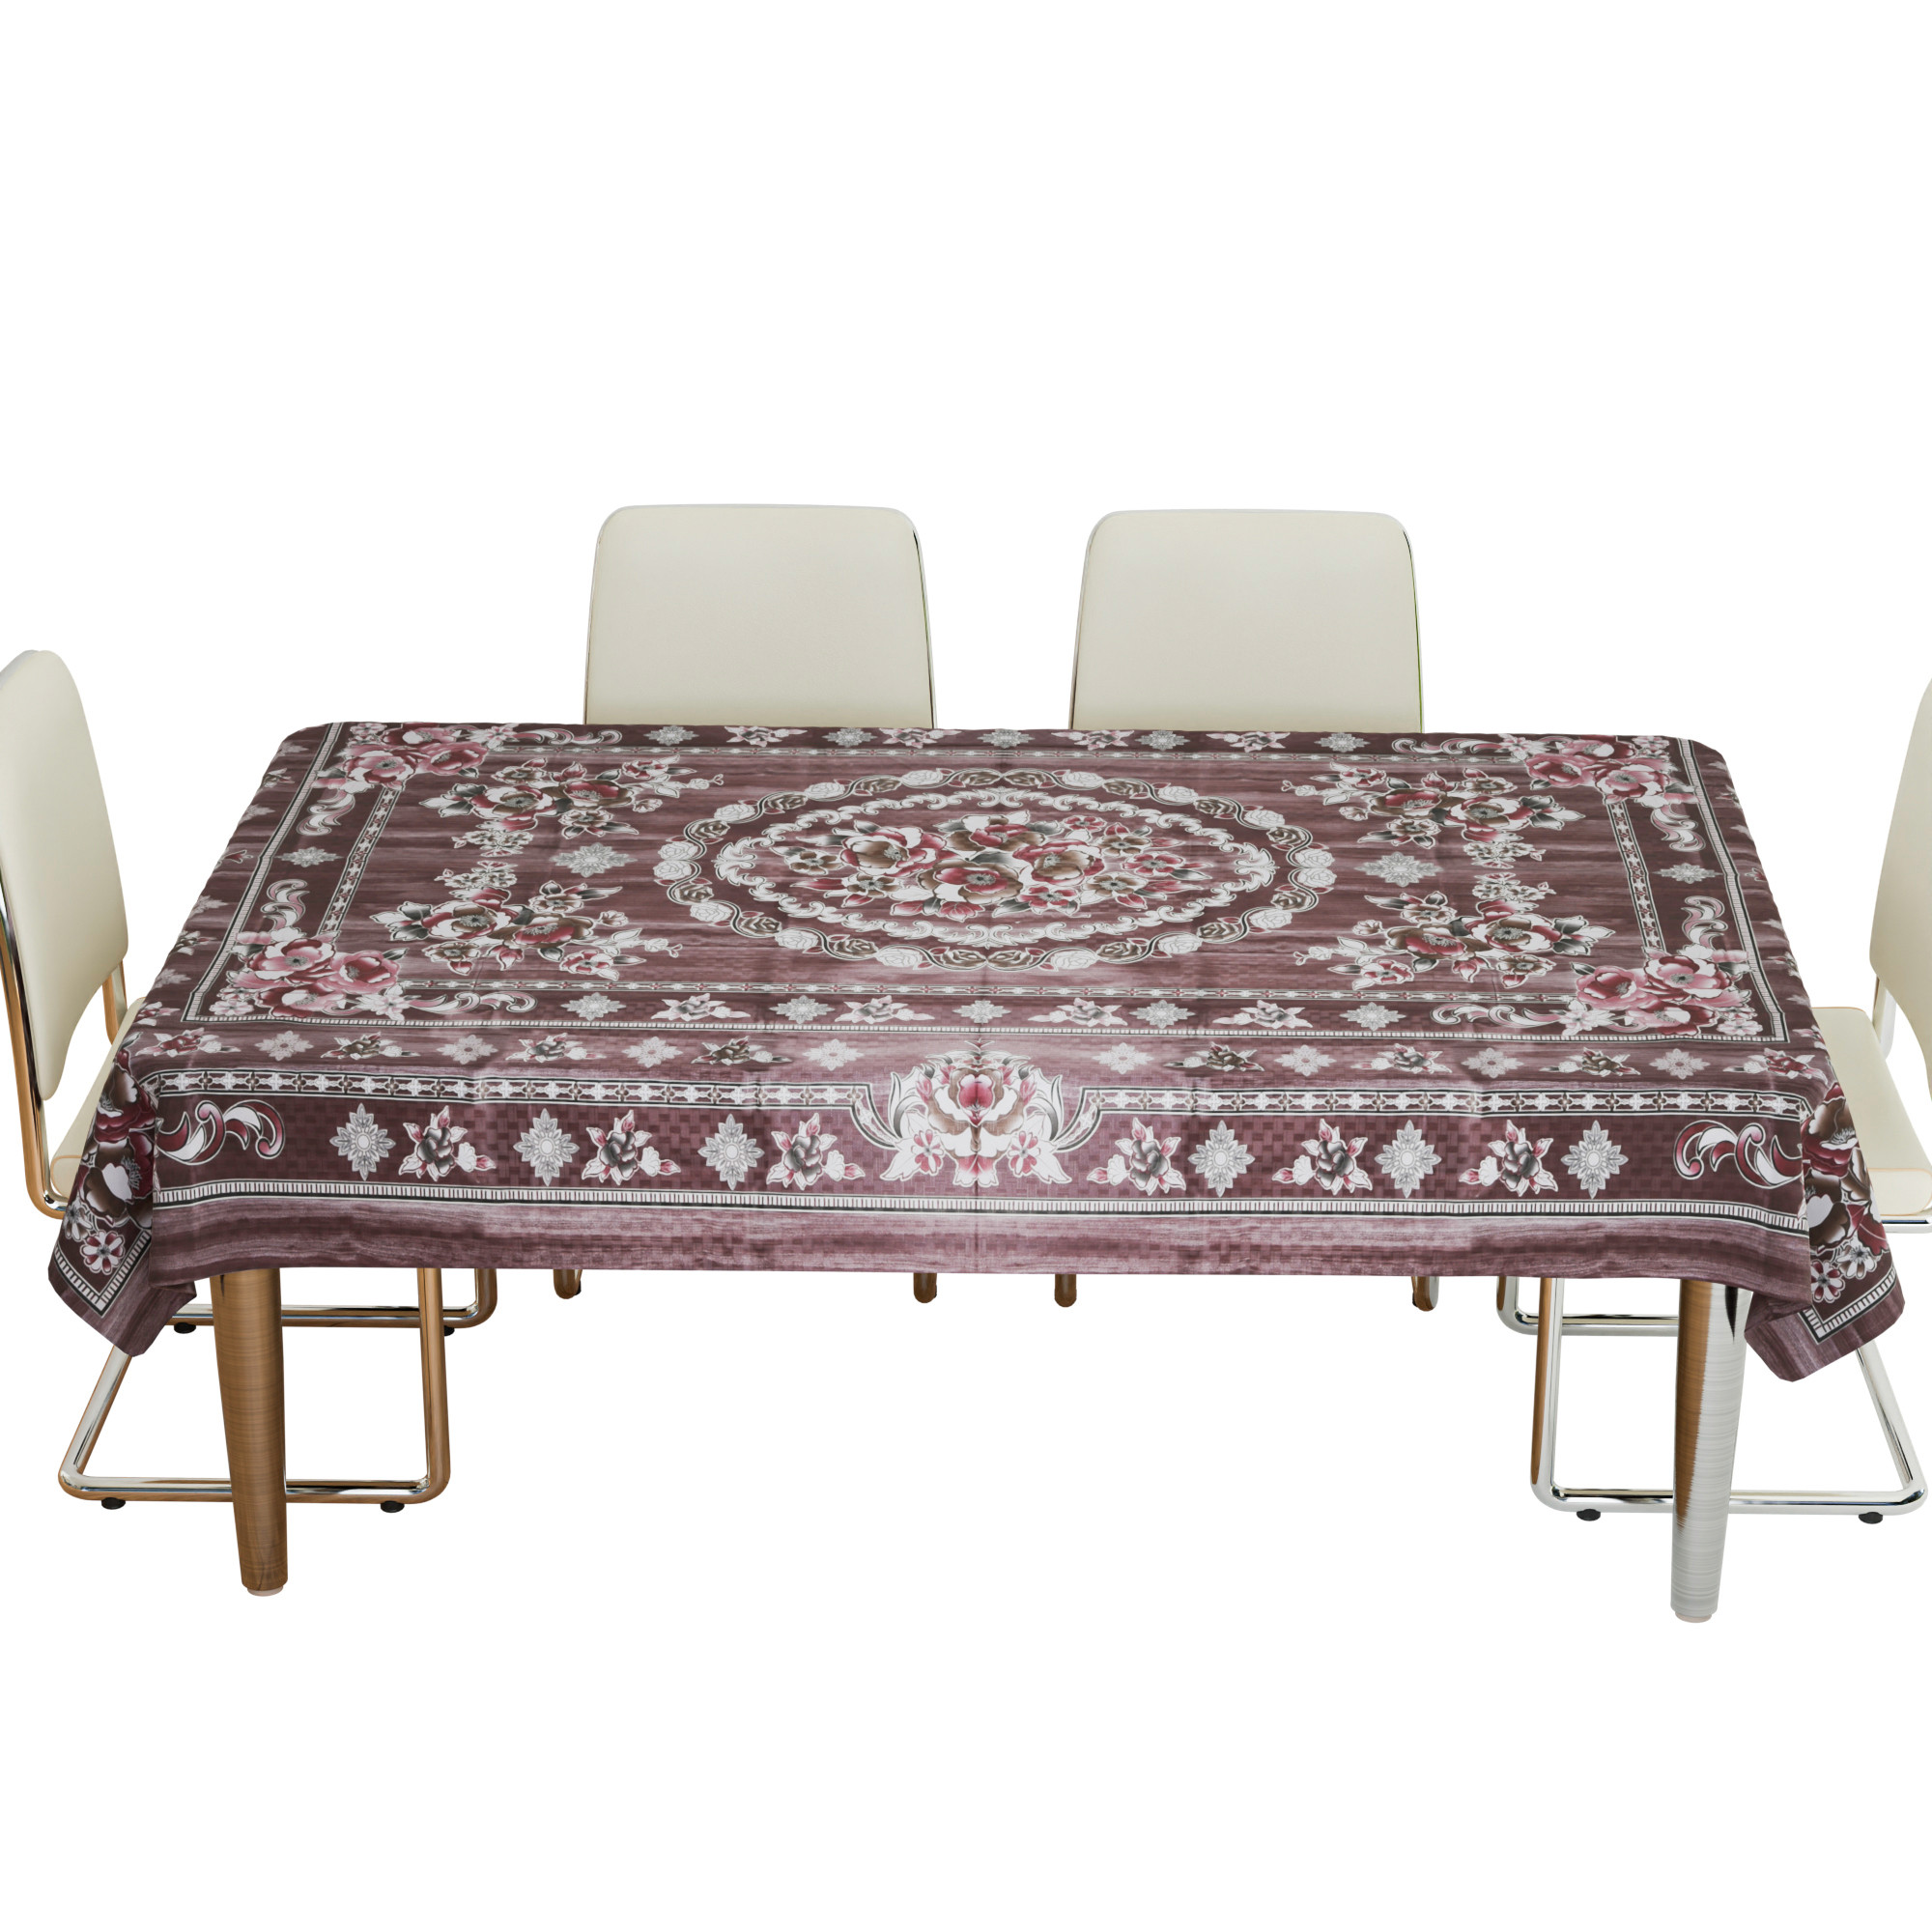 Kuber Industries Dining Table Cover | PVC Table Cloth Cover | 6 Seater Table Cloth | Table Protector | Table Cover for Dining Table | Passion Flower | 60x90 Inch | DTC | Maroon